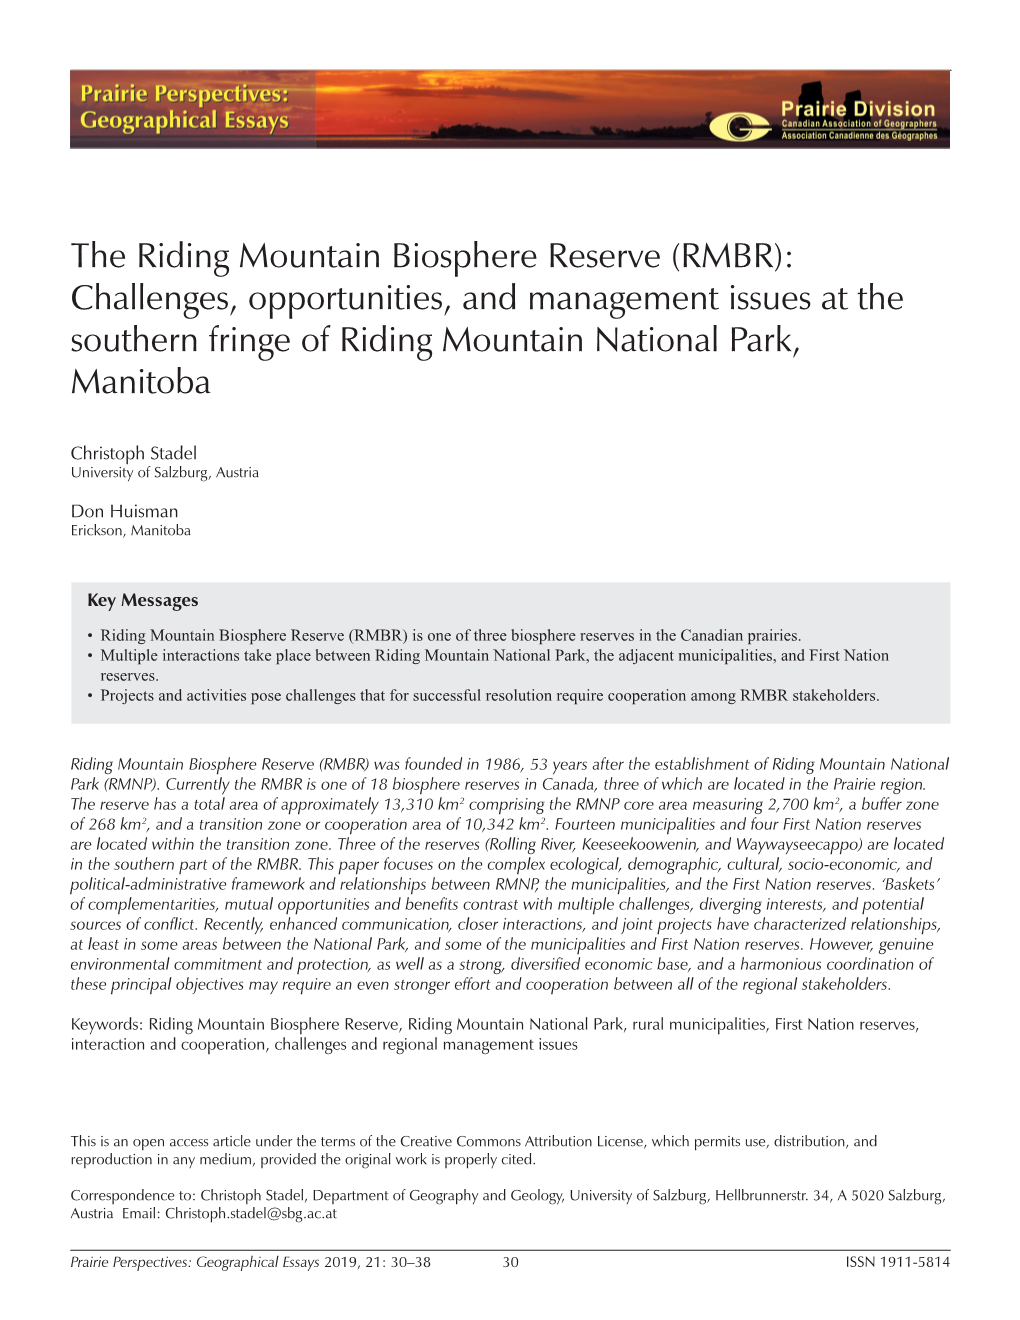 The Riding Mountain Biosphere Reserve